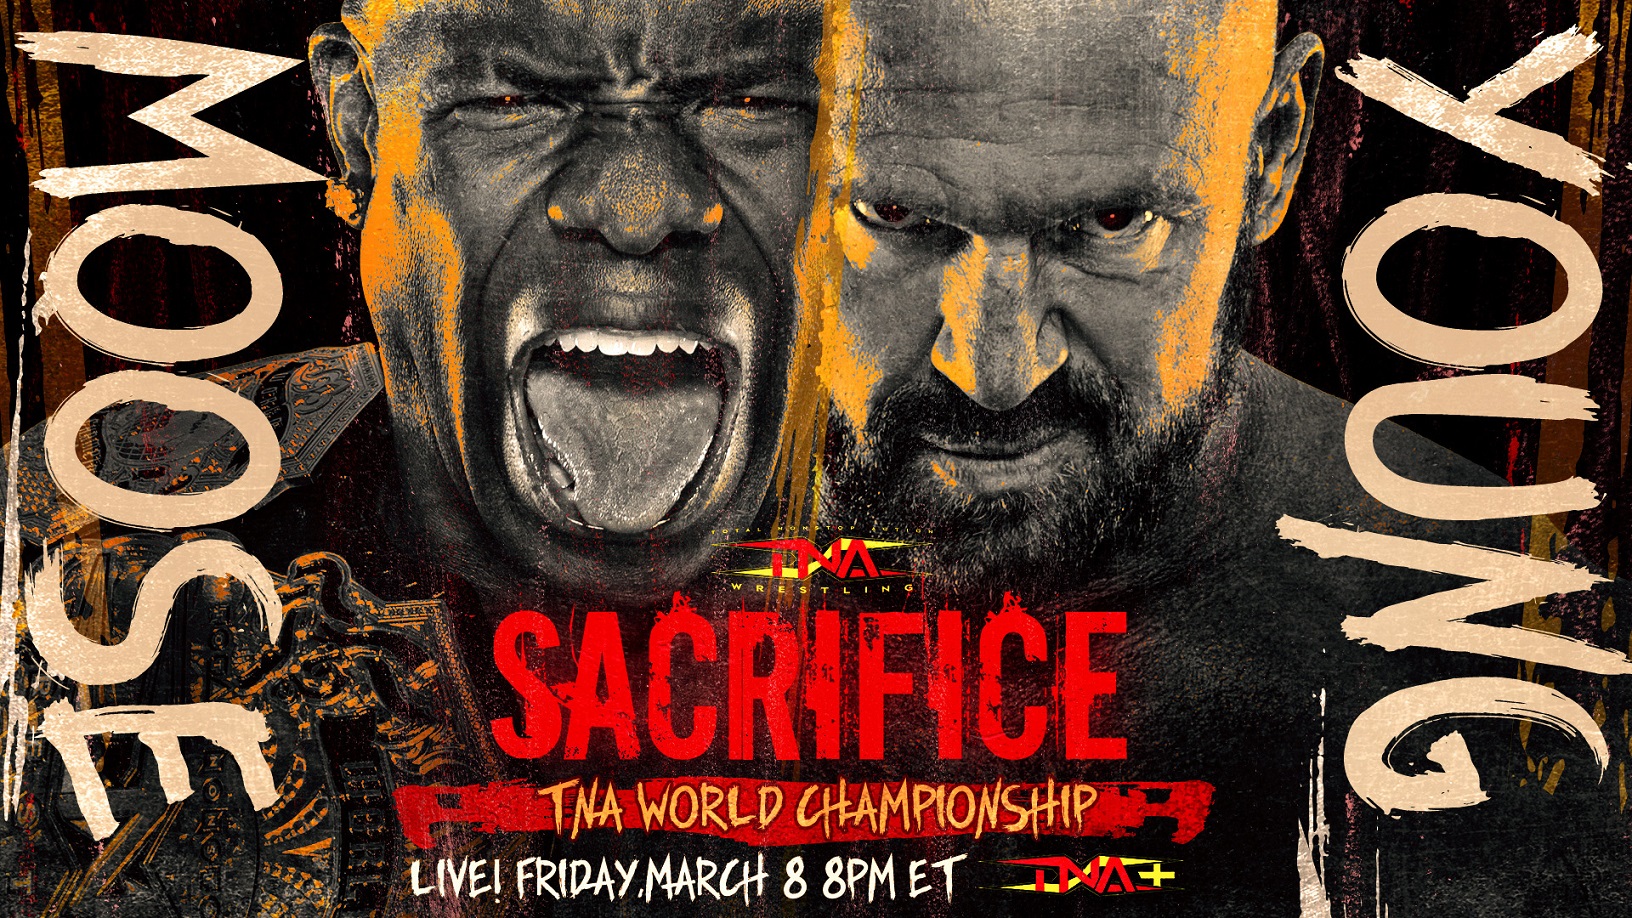 Eric Young Earns TNA World Championship Opportunity vs. Moose at Sacrifice – TNA Wrestling